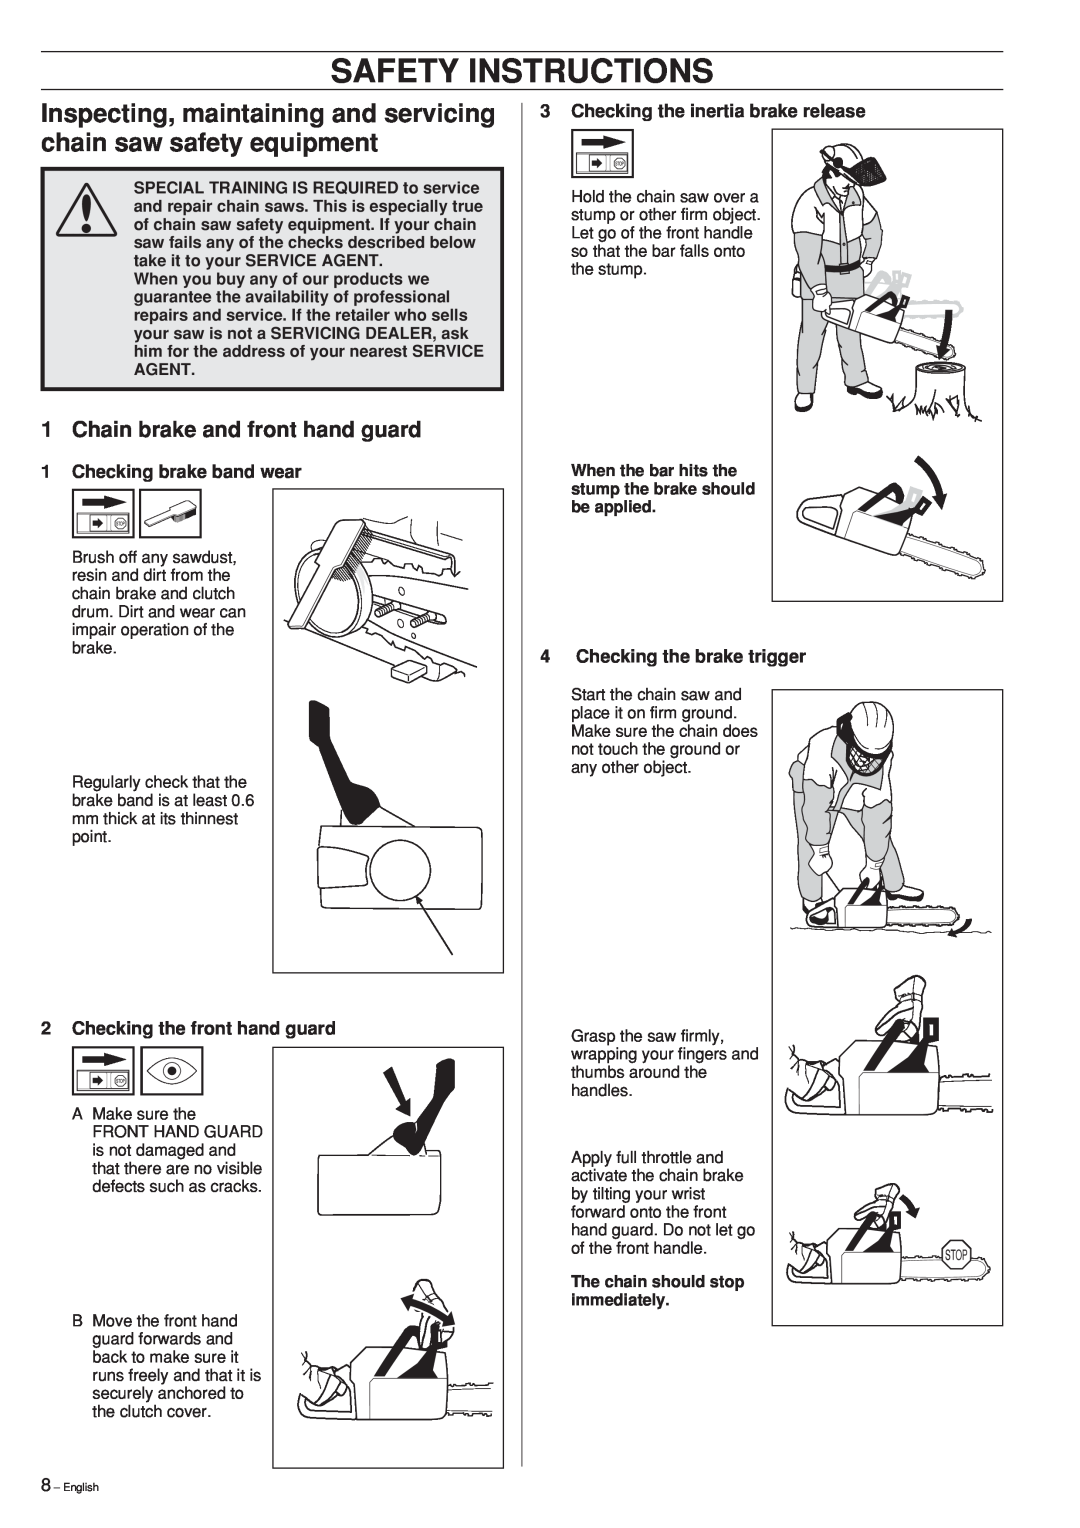 Husqvarna 55 manual Safety Instructions, Inspecting, maintaining and servicing chain saw safety equipment 